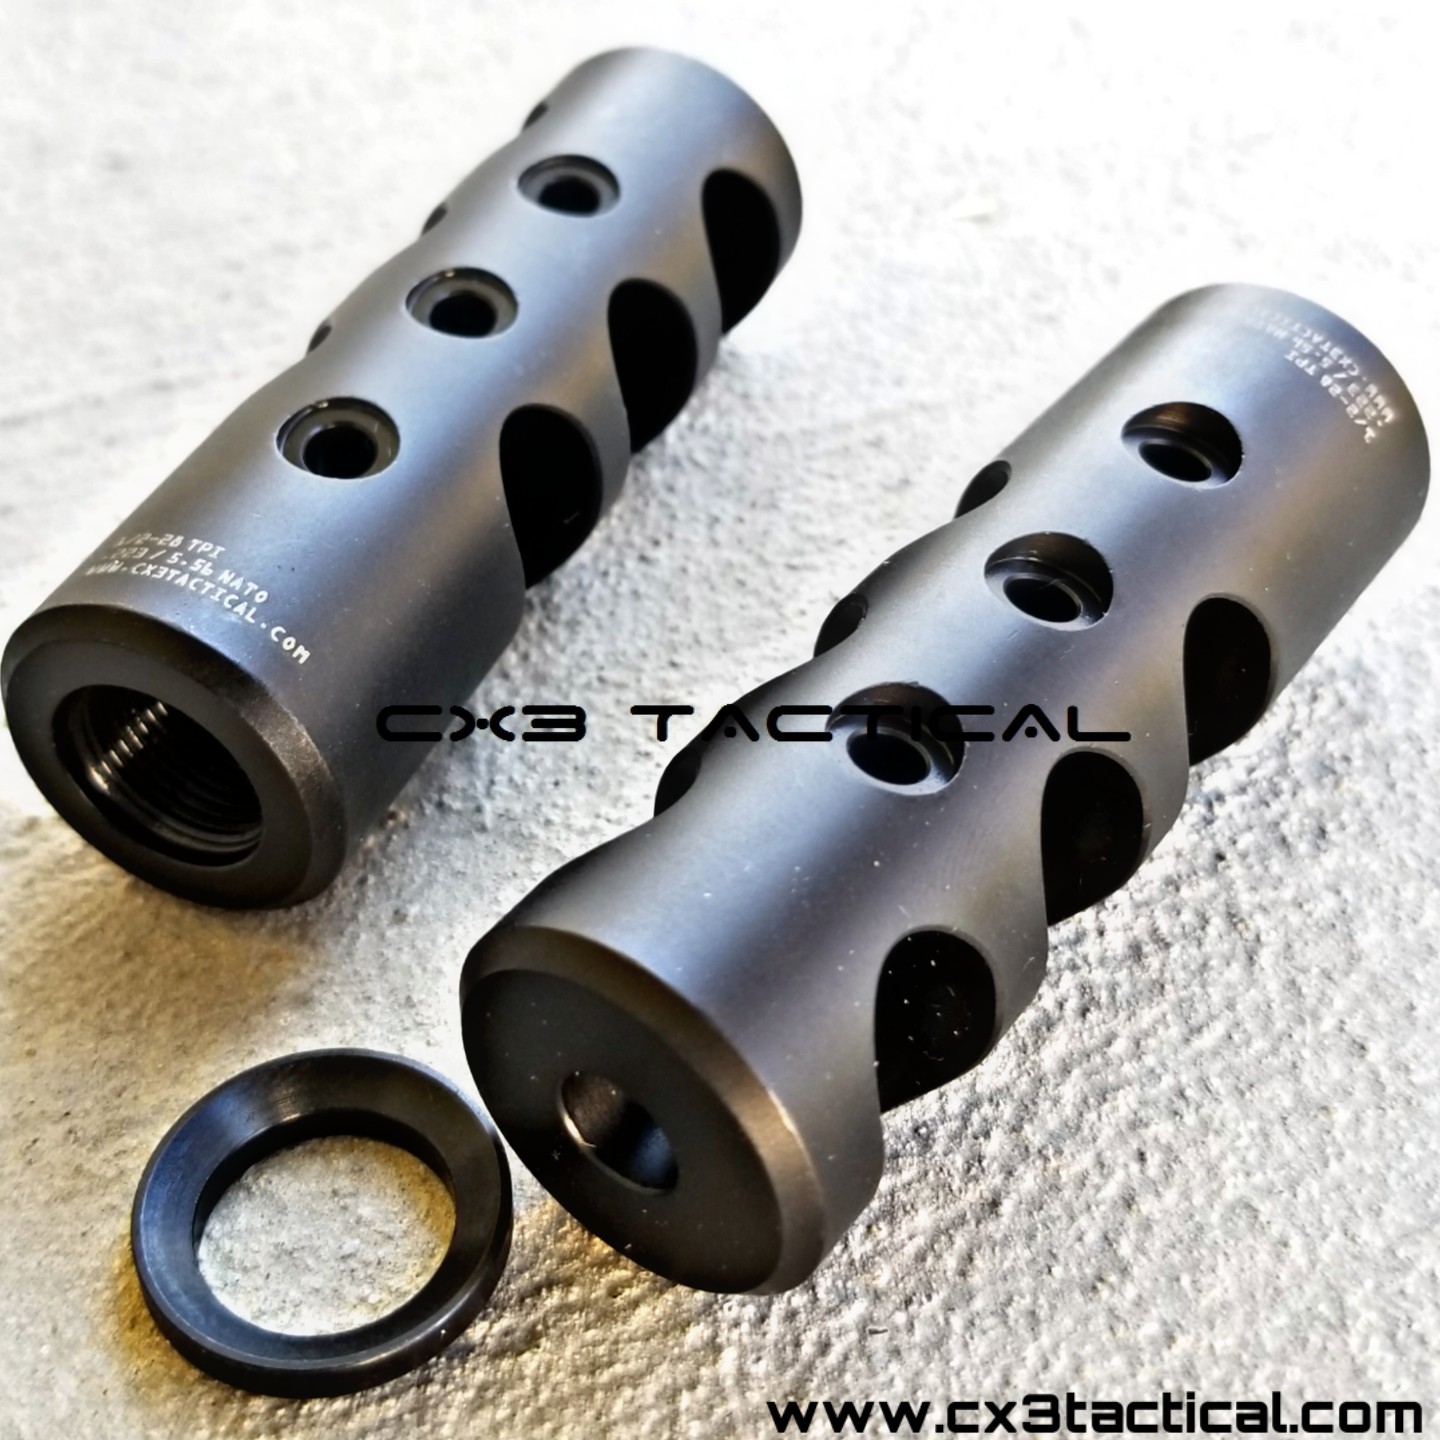 Stainless Steel Full Size 1/2x28 Thread .223 Competition Muzzle Brake Washer 